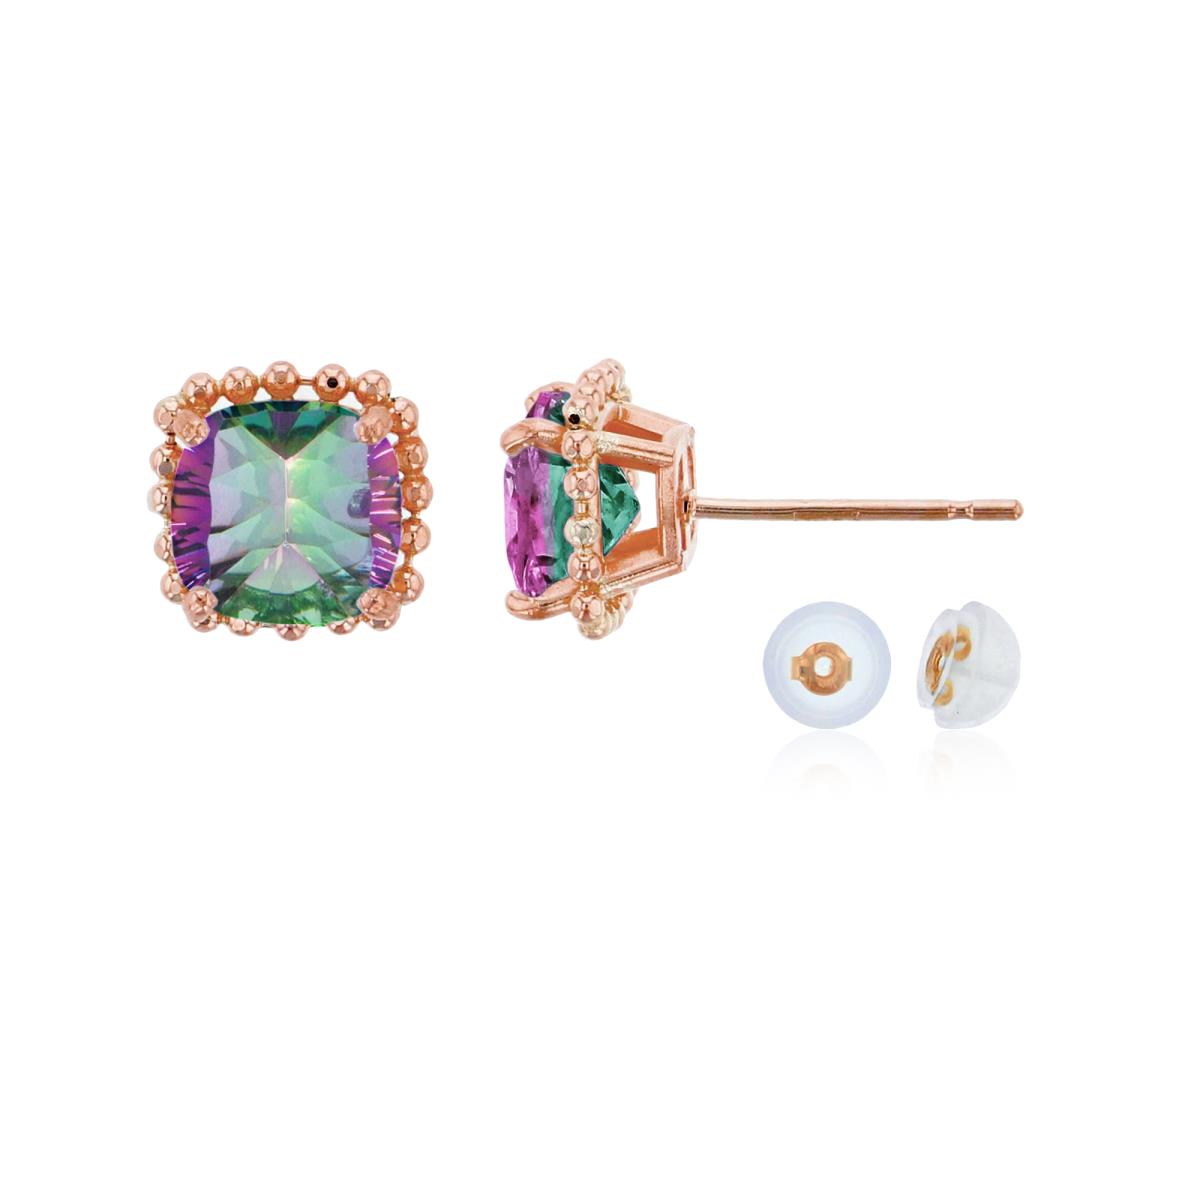 10K Rose Gold 6x6mm Cushion Cut Mystic Green Topaz Bead Frame Stud Earring with Silicone Back